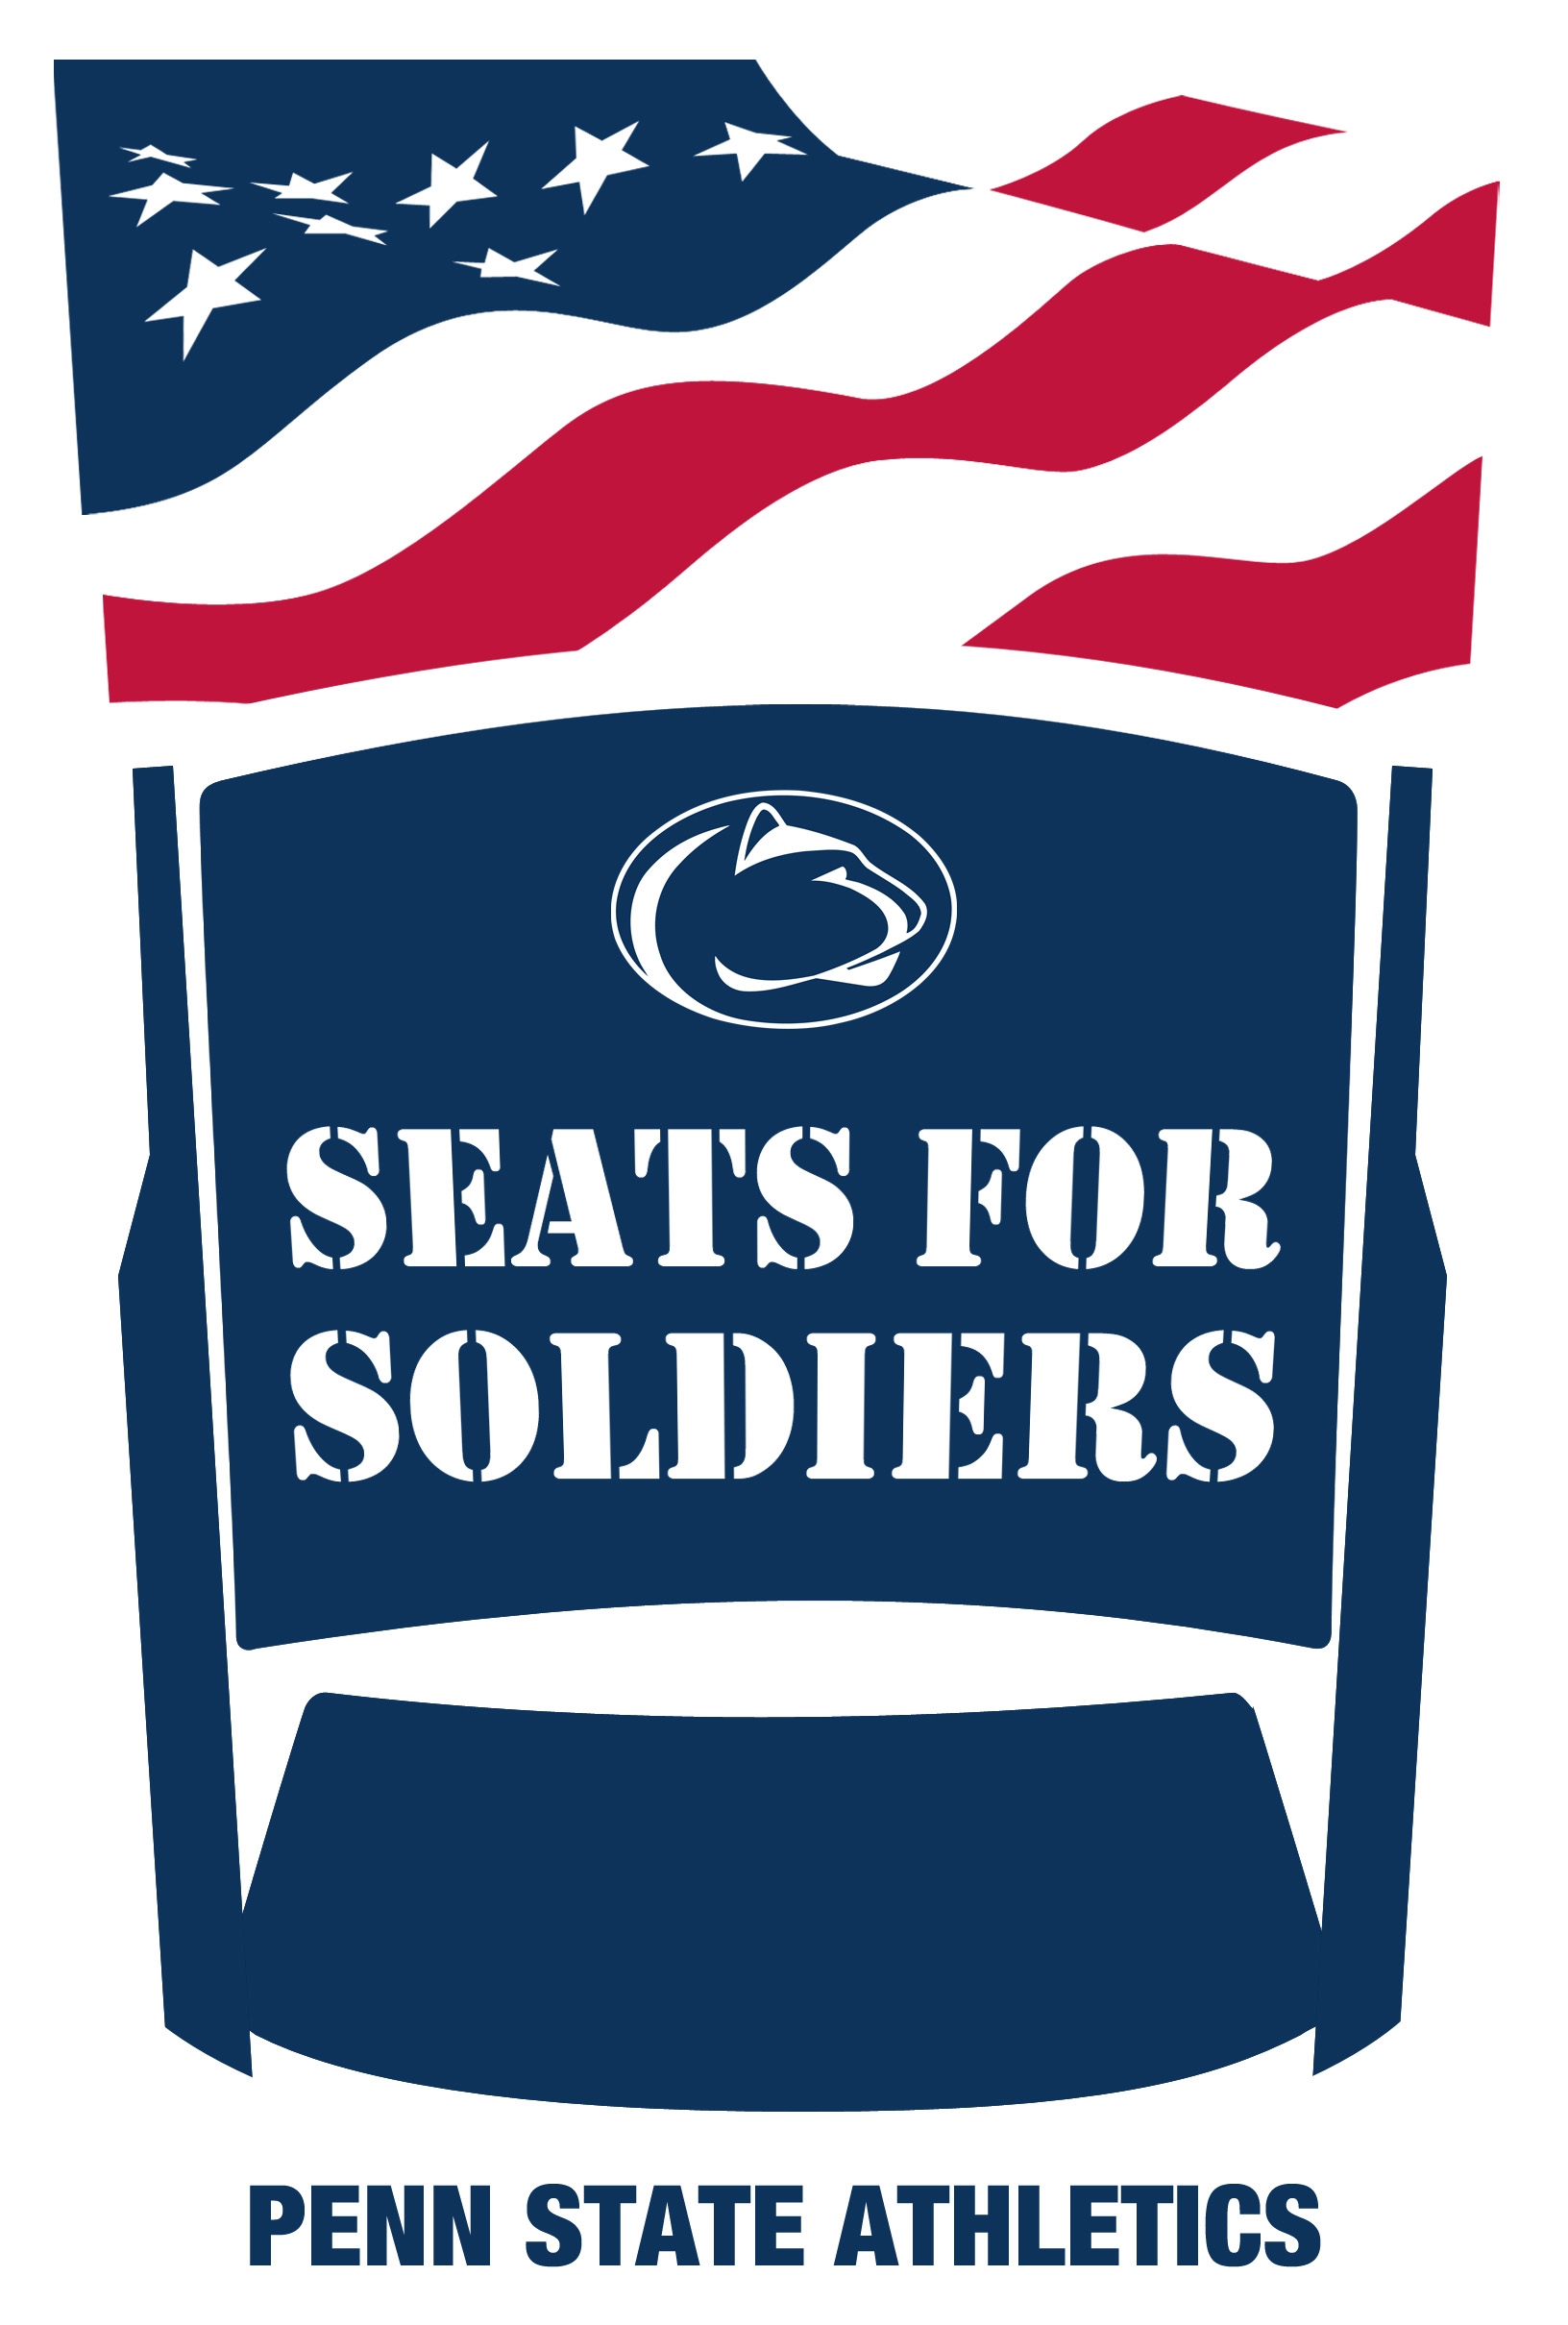 College Fans Supporting Military Through “Seats for Soldiers”